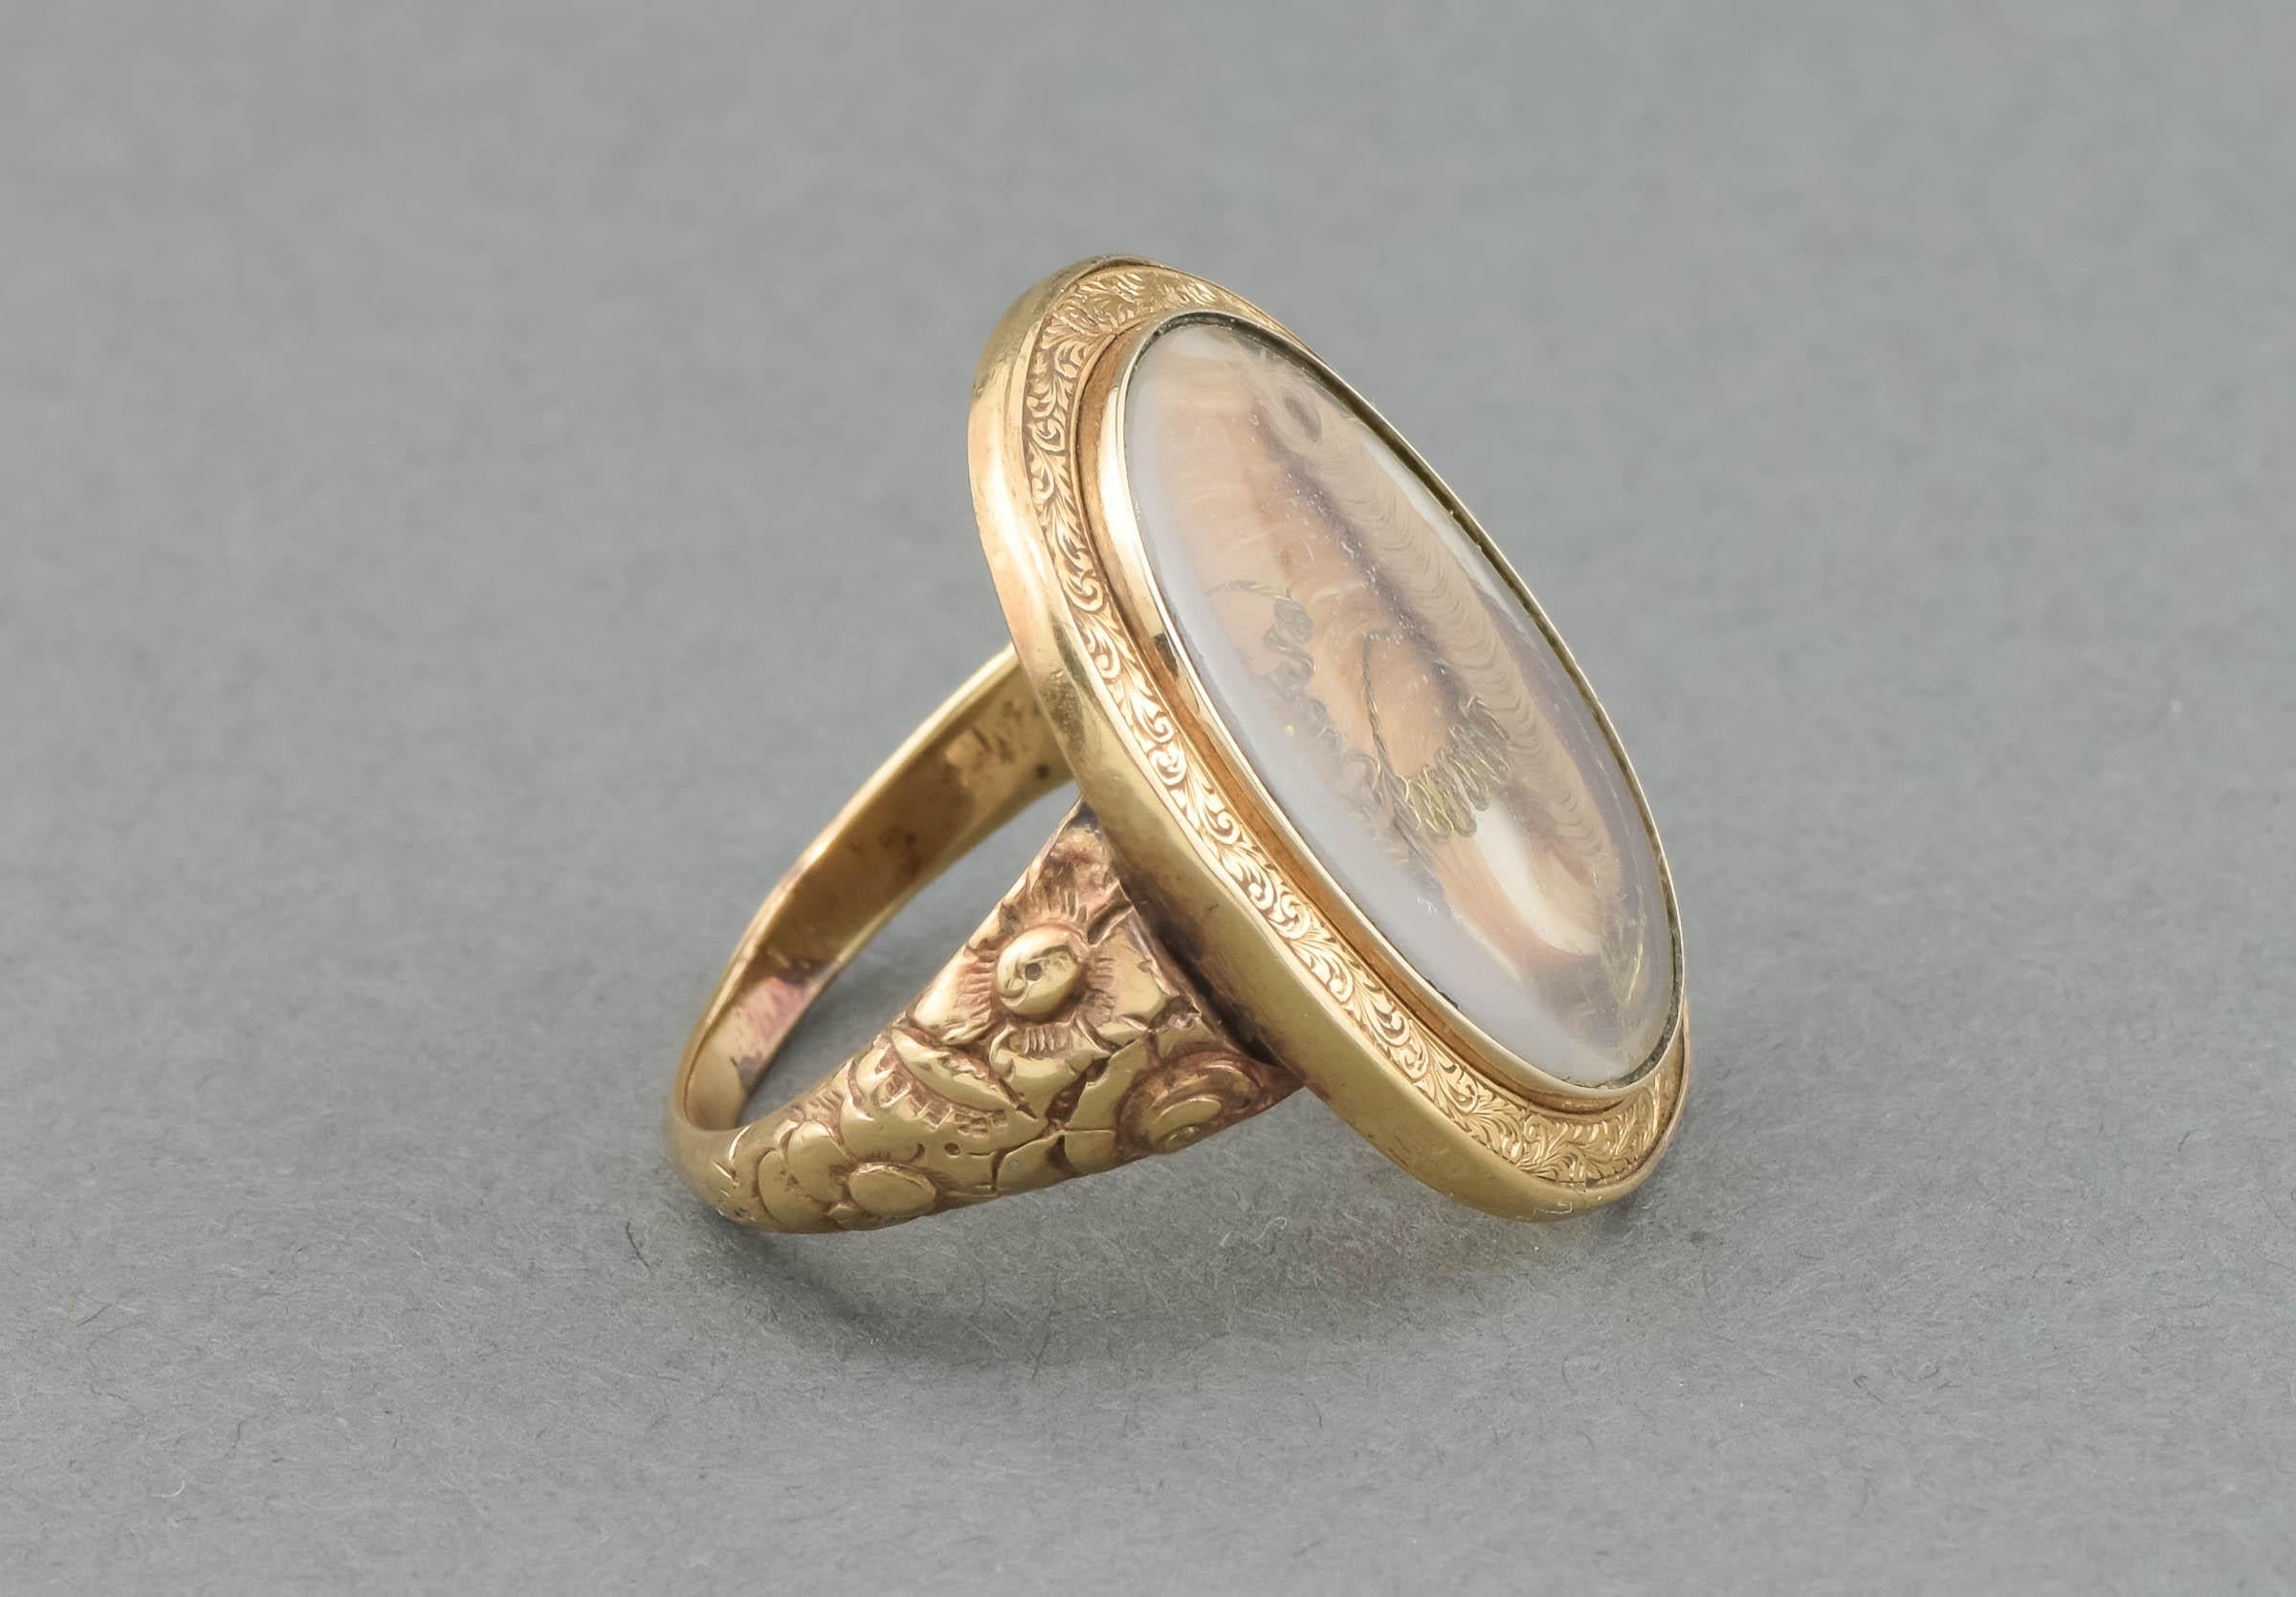 Antique Large Gold Locket Faced Ring with Hair Work, Engraved 1860 For Sale 3